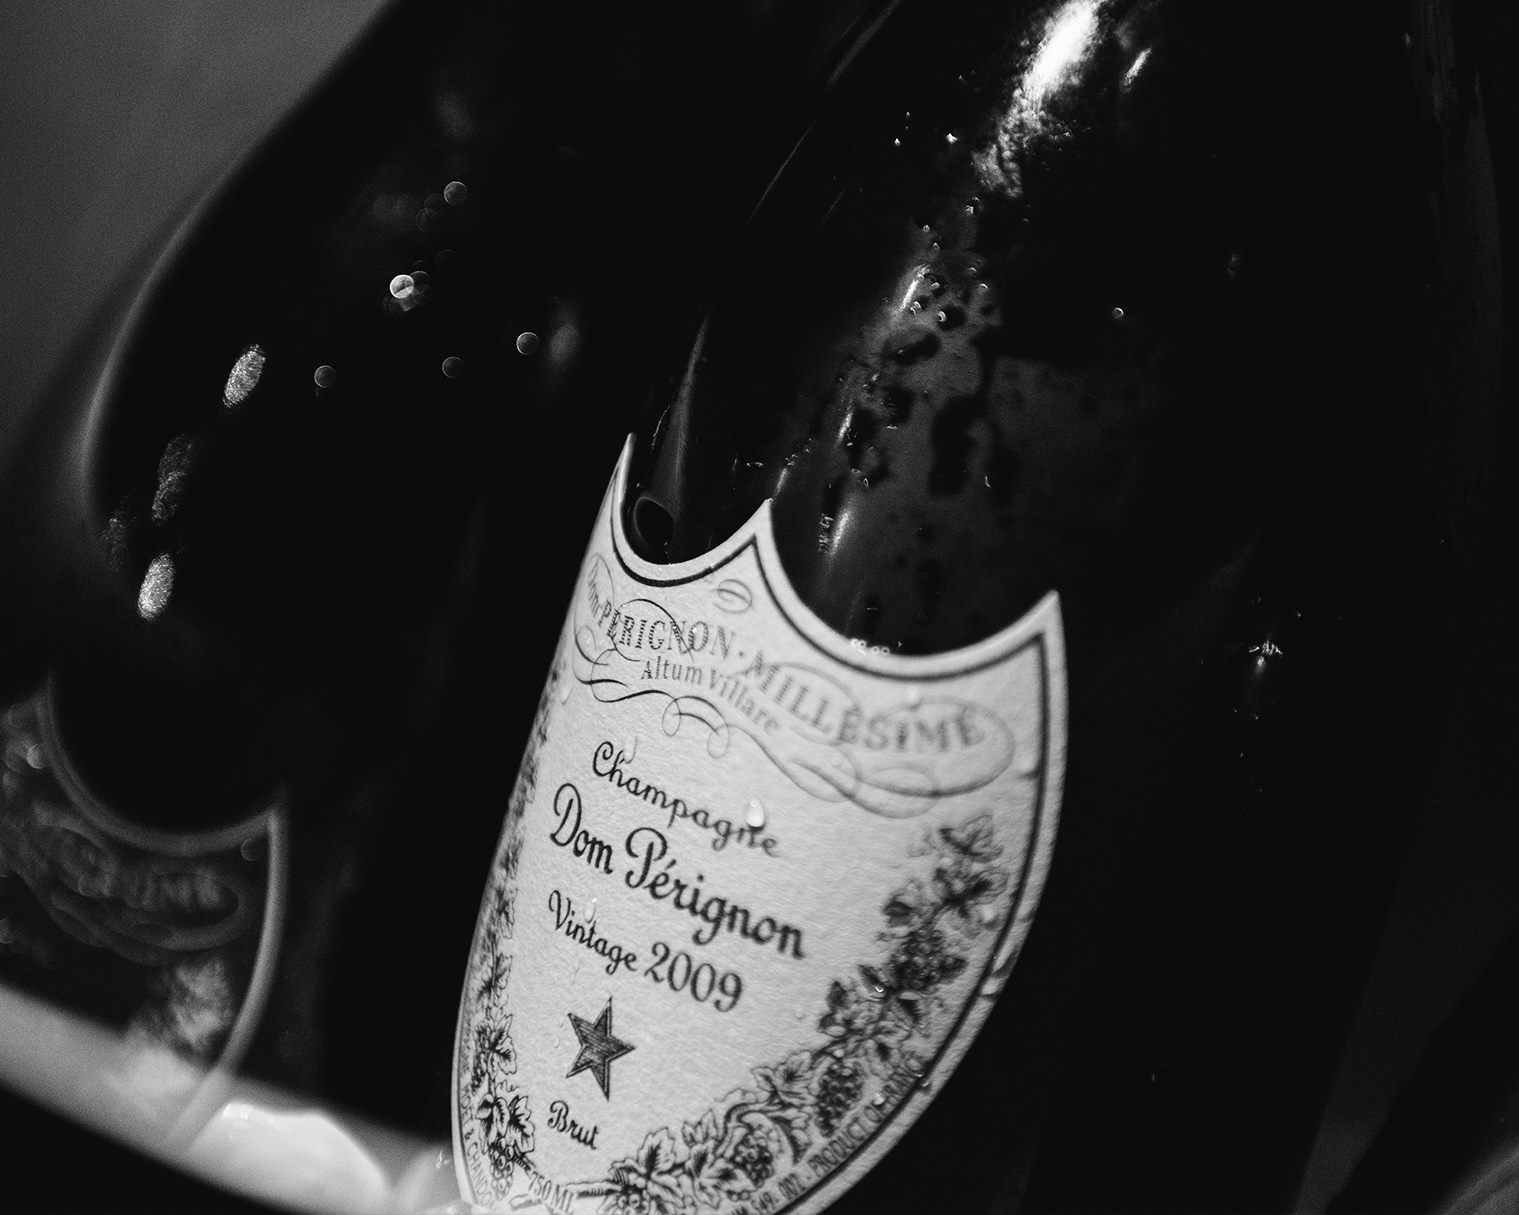 Winemaking monk Dom Perignon's fame continues to bubble